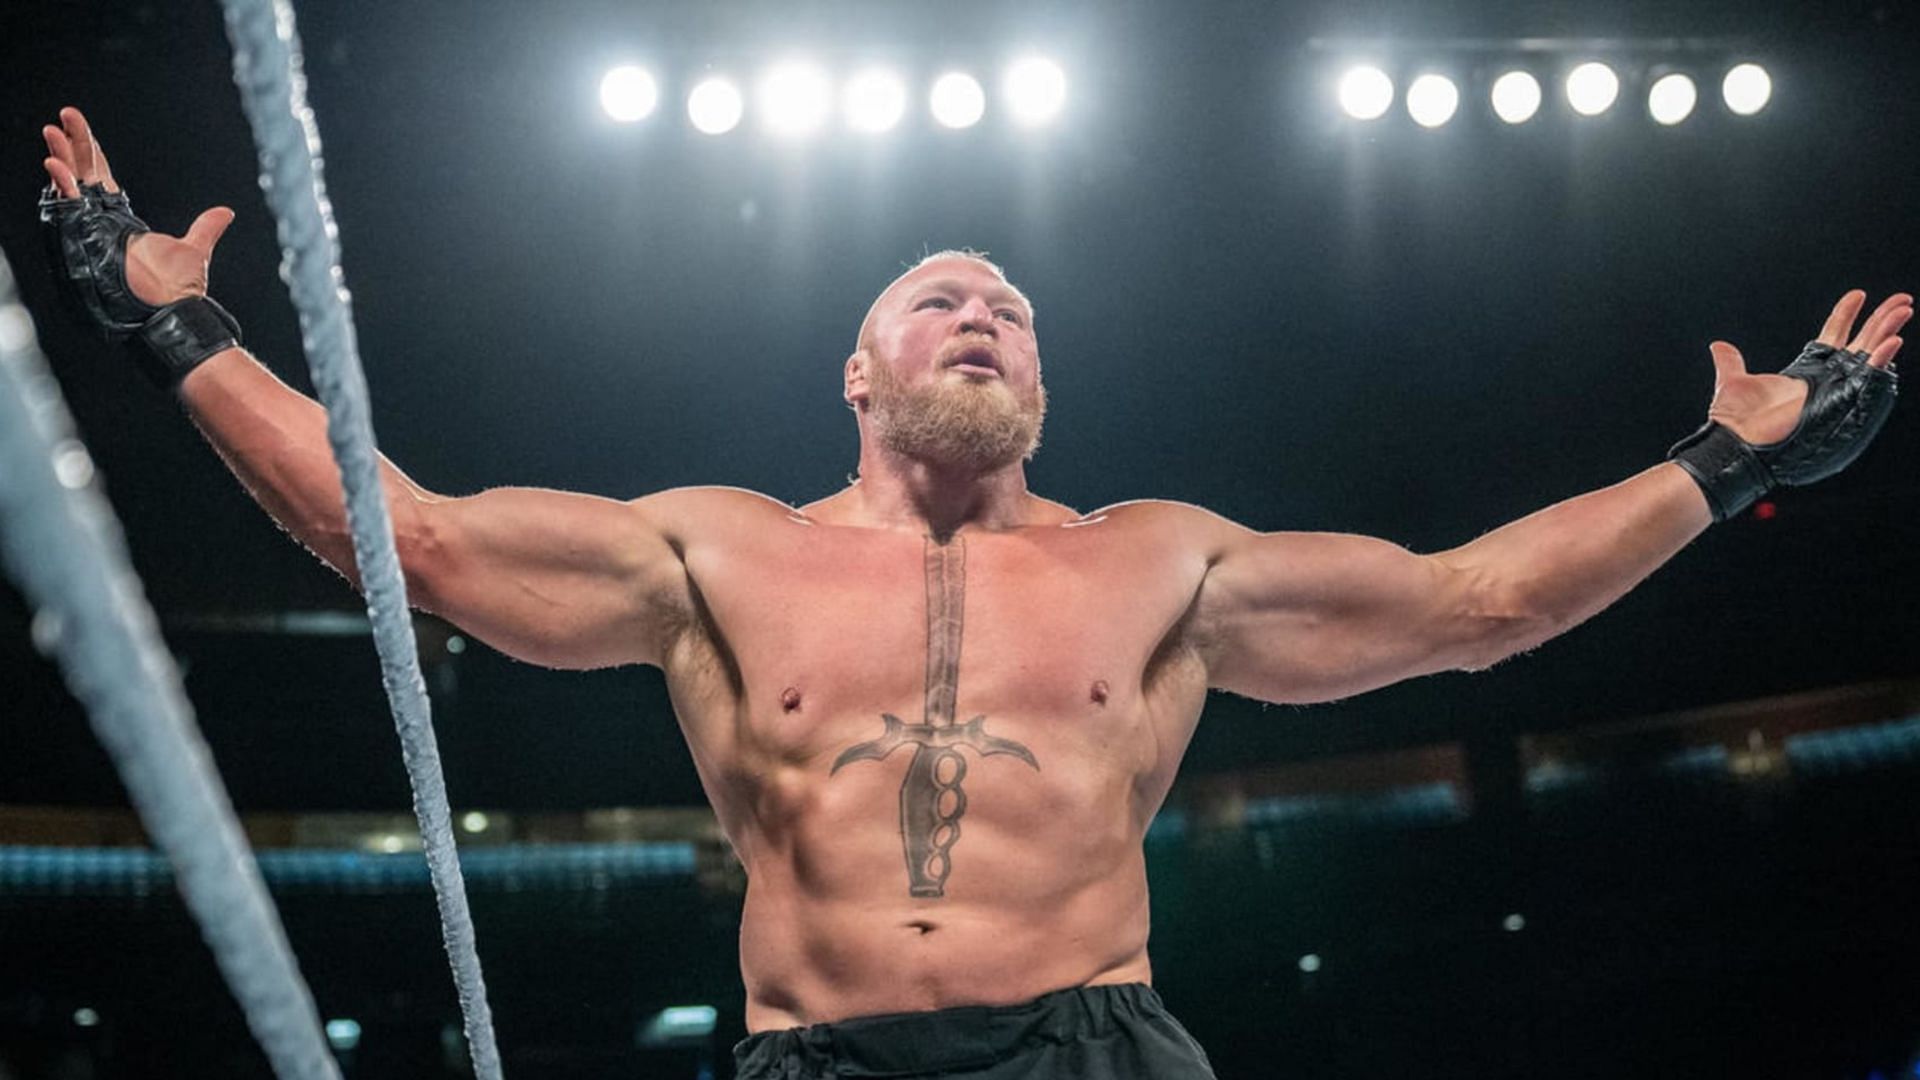 Brock Lesnar is at an interesting stage in his career